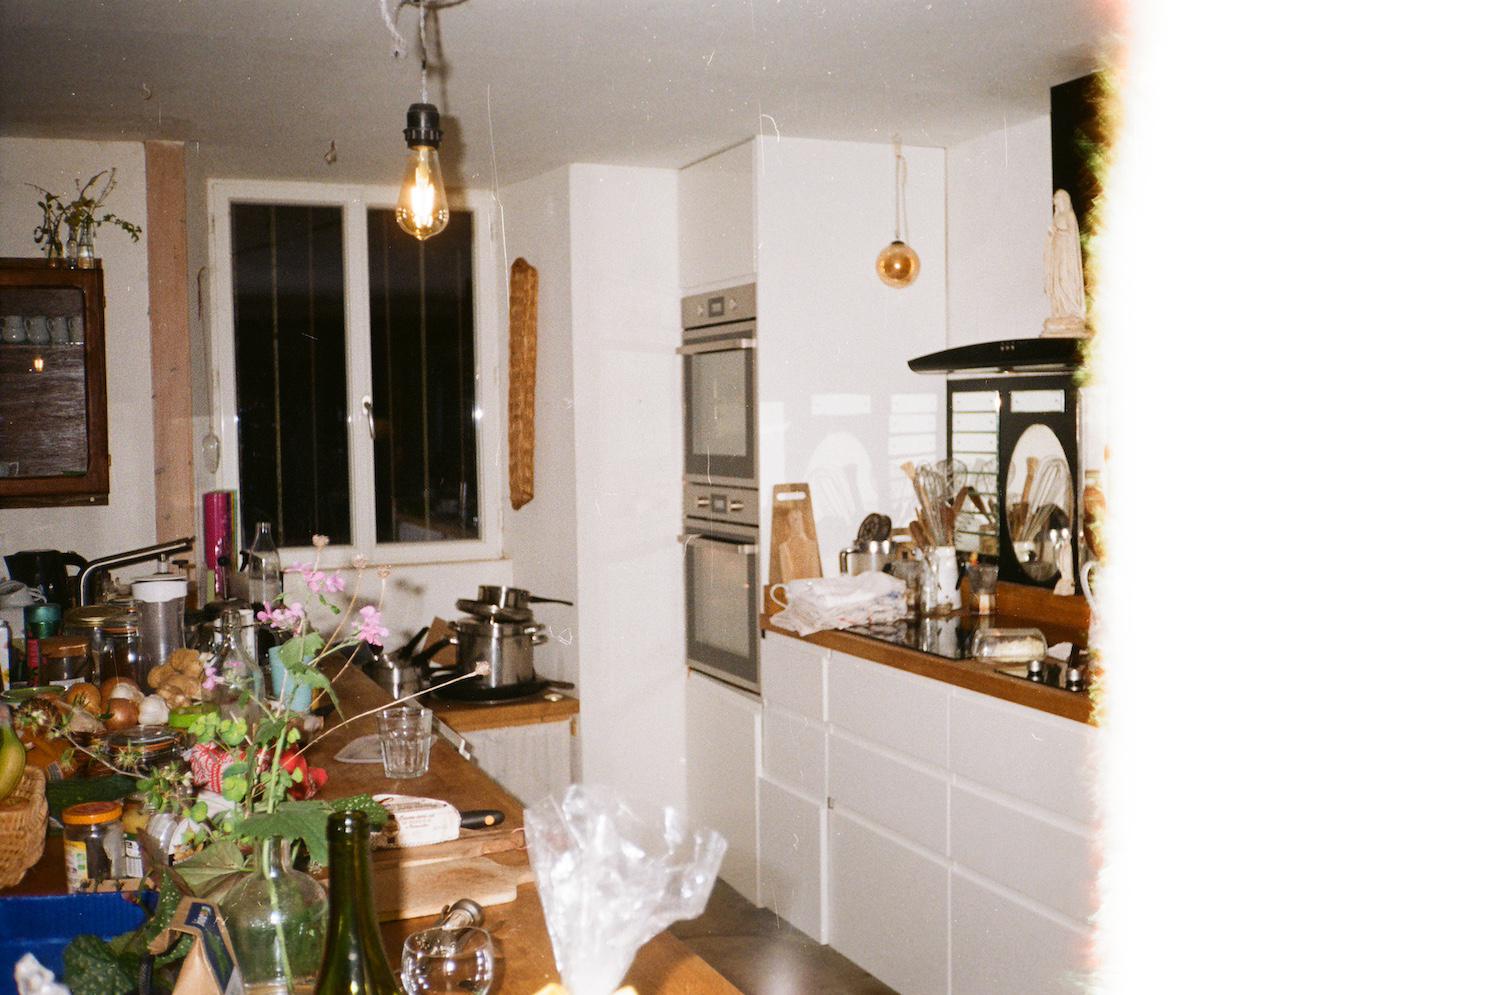 the film roll starts at one end so some of the image of a kitchen is cut off, but you can see white cabinetry and a double oven, an exposed lightbulb, and flowers on the counters